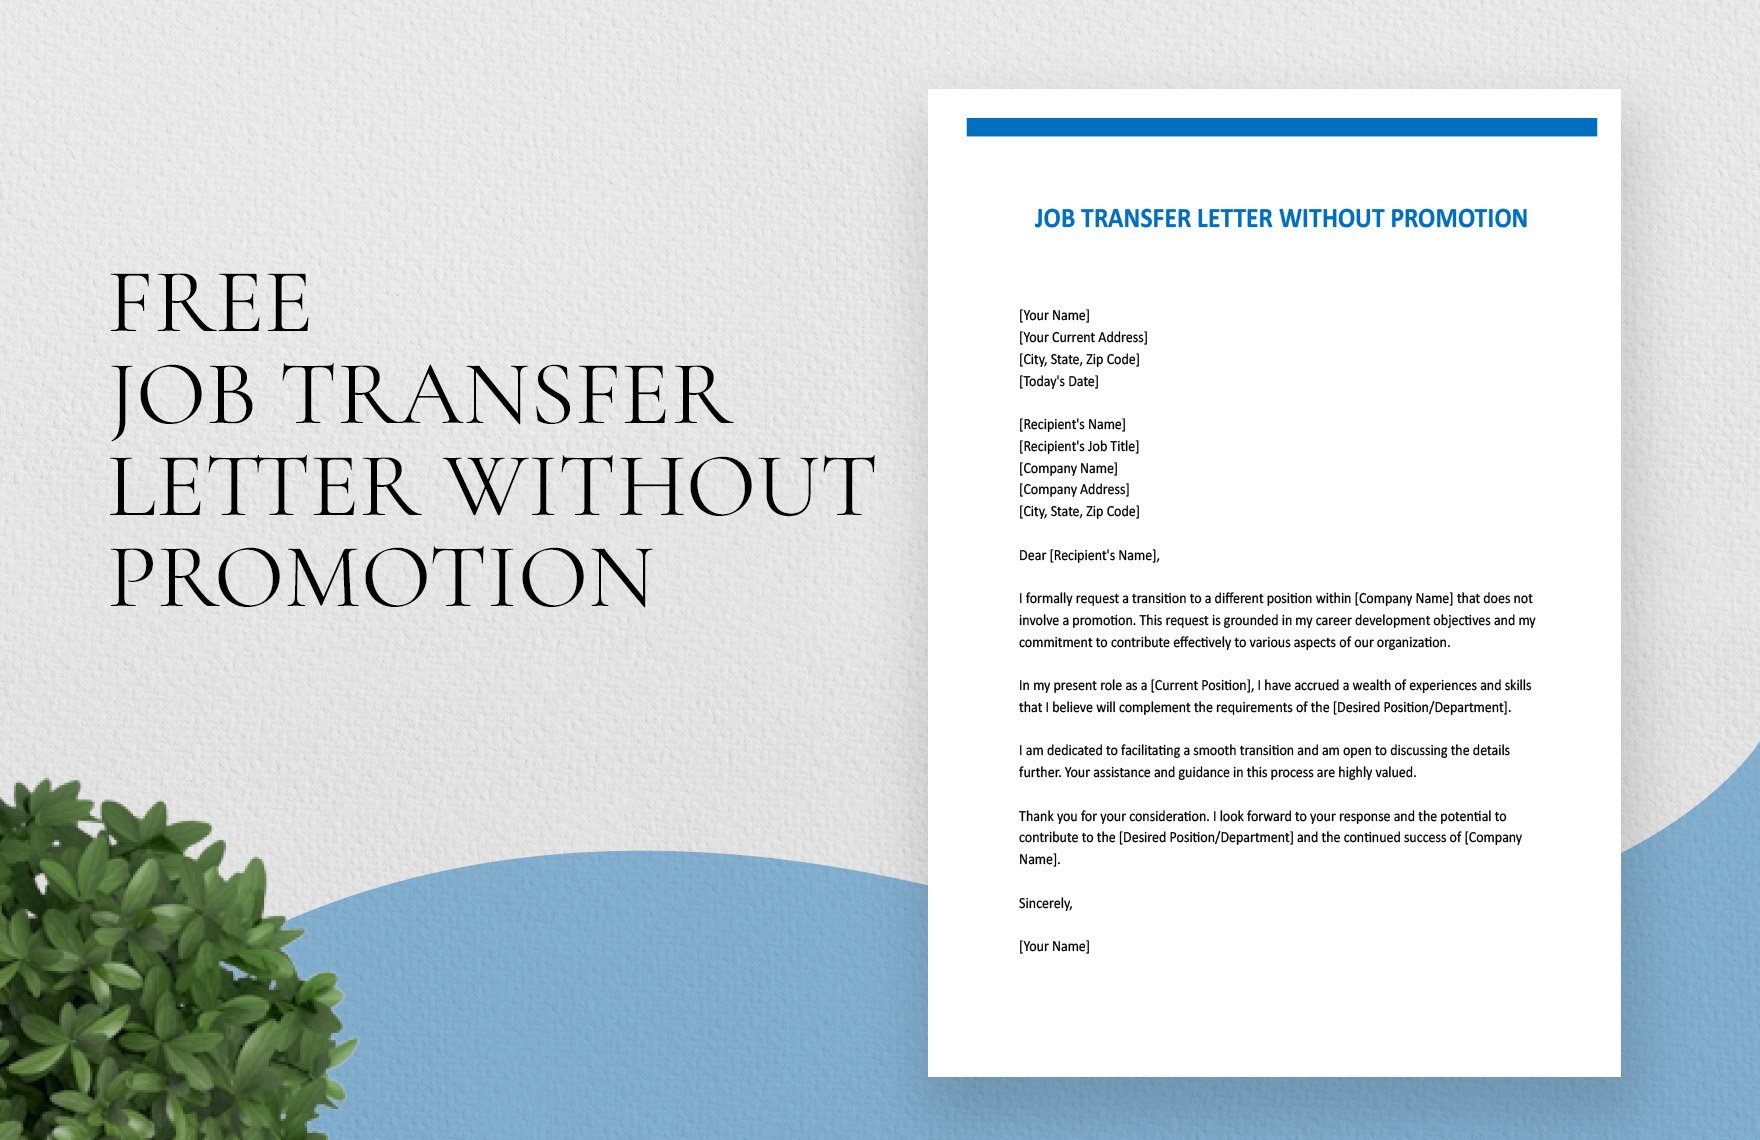 Job Transfer Letter Without Promotion